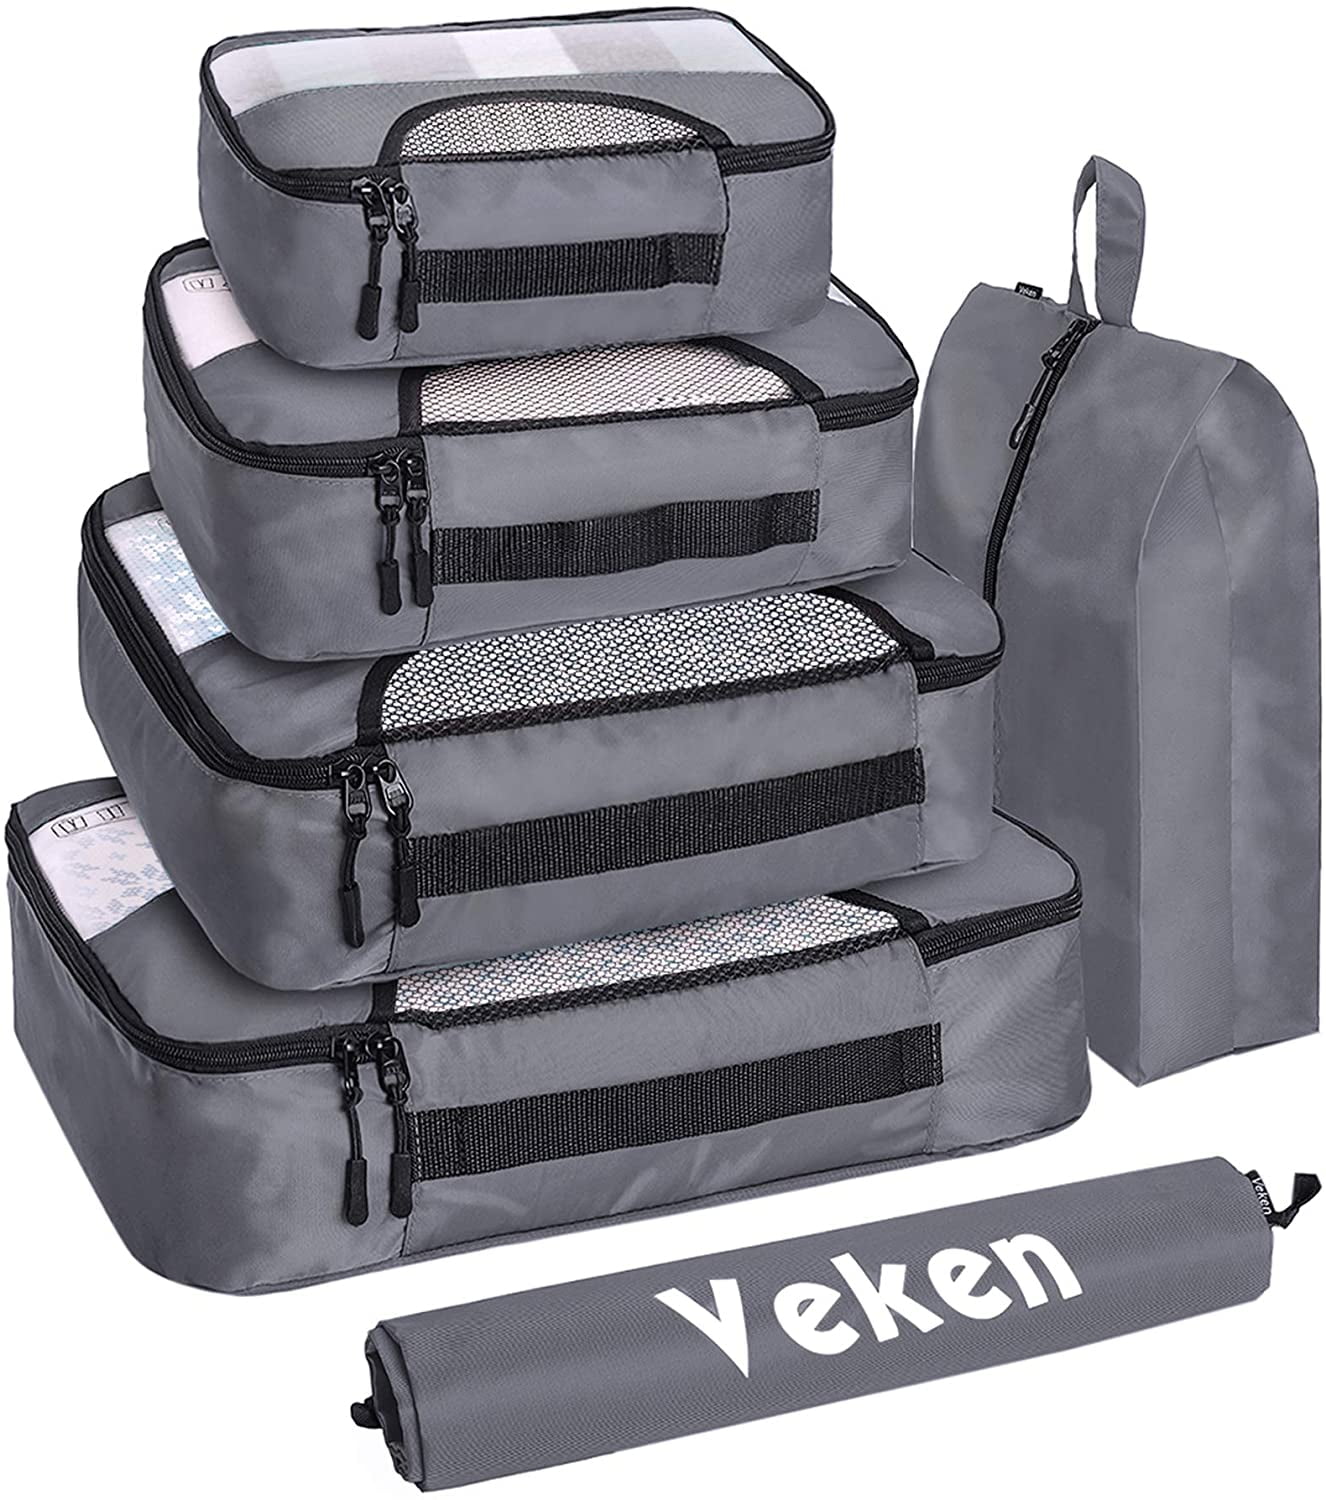 Ash Gray Veken 6 Set Packing Cubes Travel Suitcase Luggage Organizers with Laundry Bag & Shoe Bag 